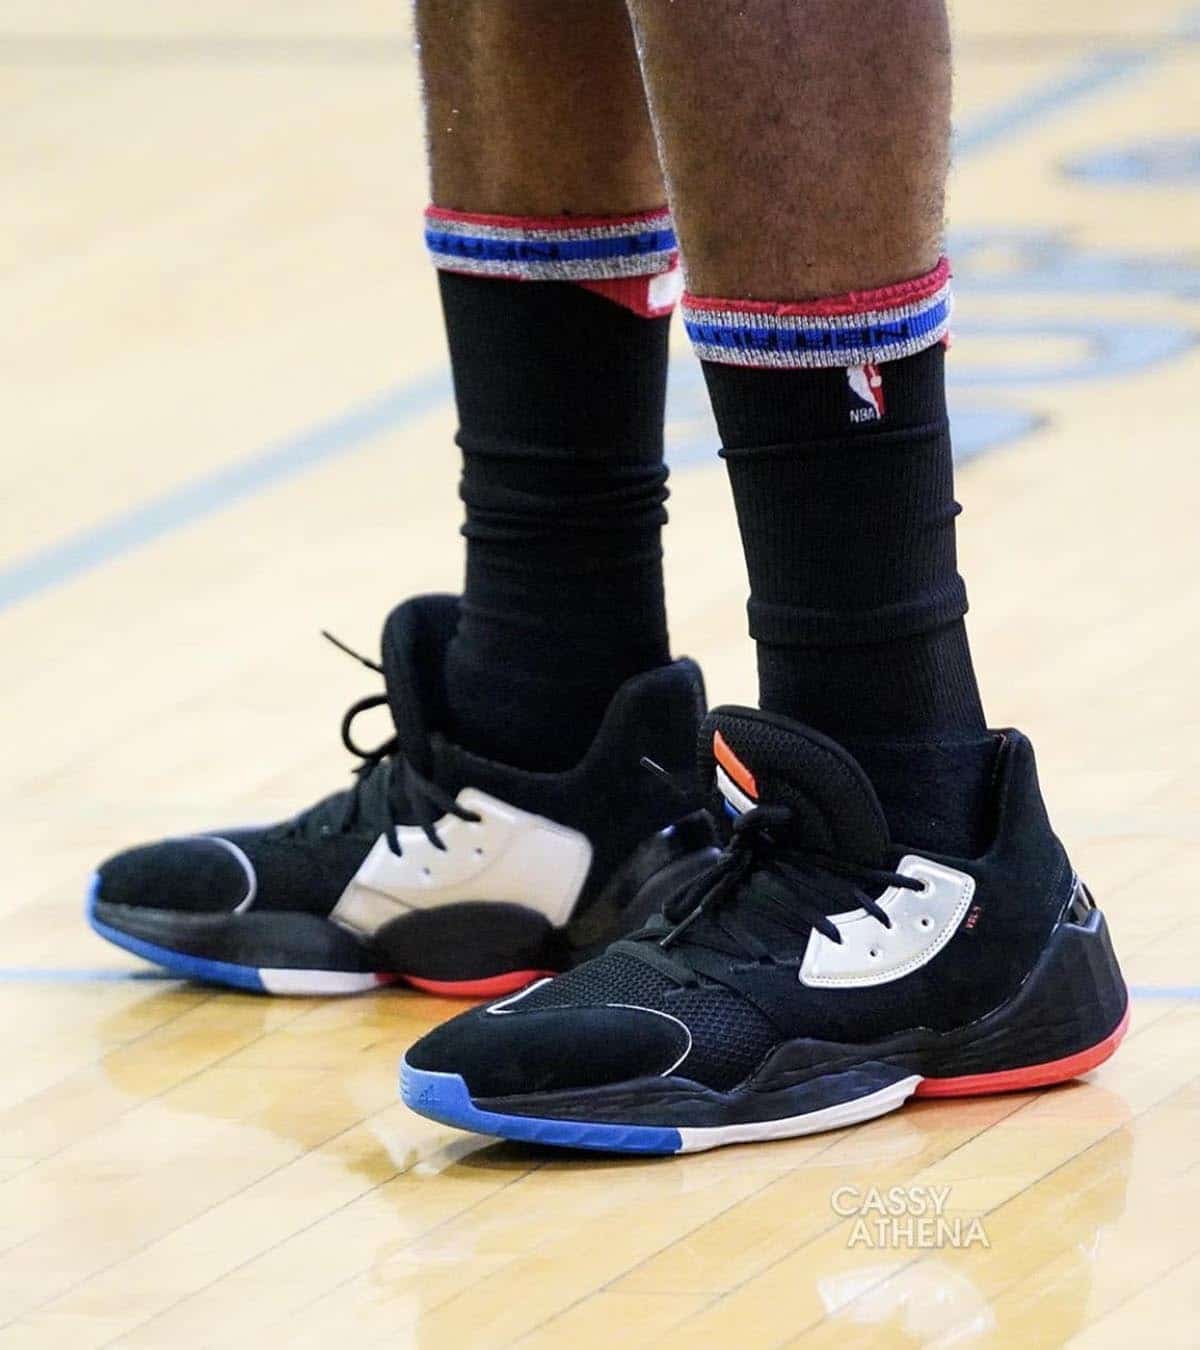 [Yahoo] James Harden's Adidas signature shoe is a reflection of his own ...